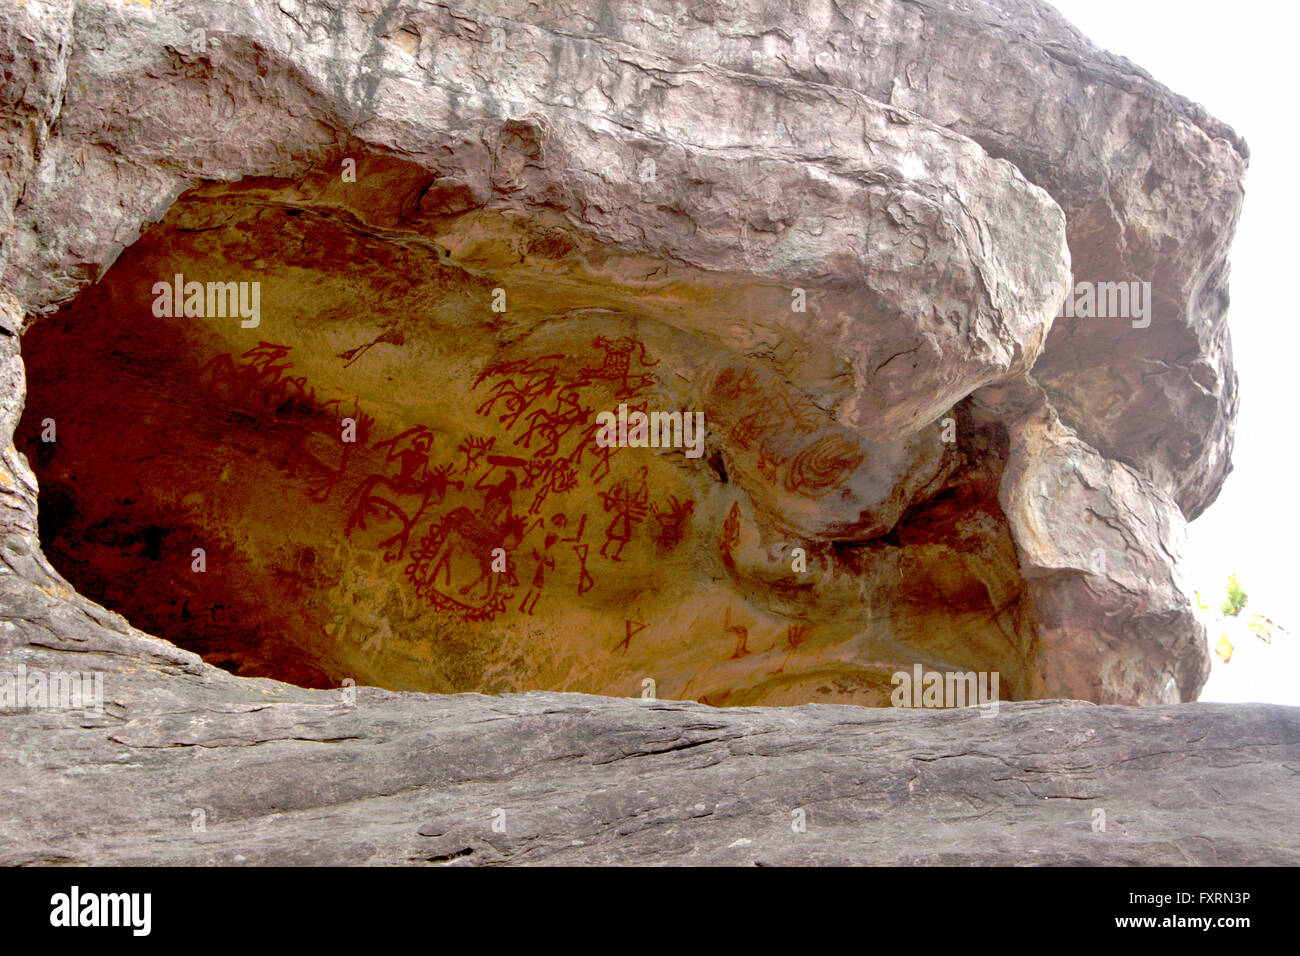 Prehistoric rock shelter and paintings depicting life of cave-dwellers at Bhimbetka, near Bhopal, Madhya Pradesh, India, Asia Stock Photo